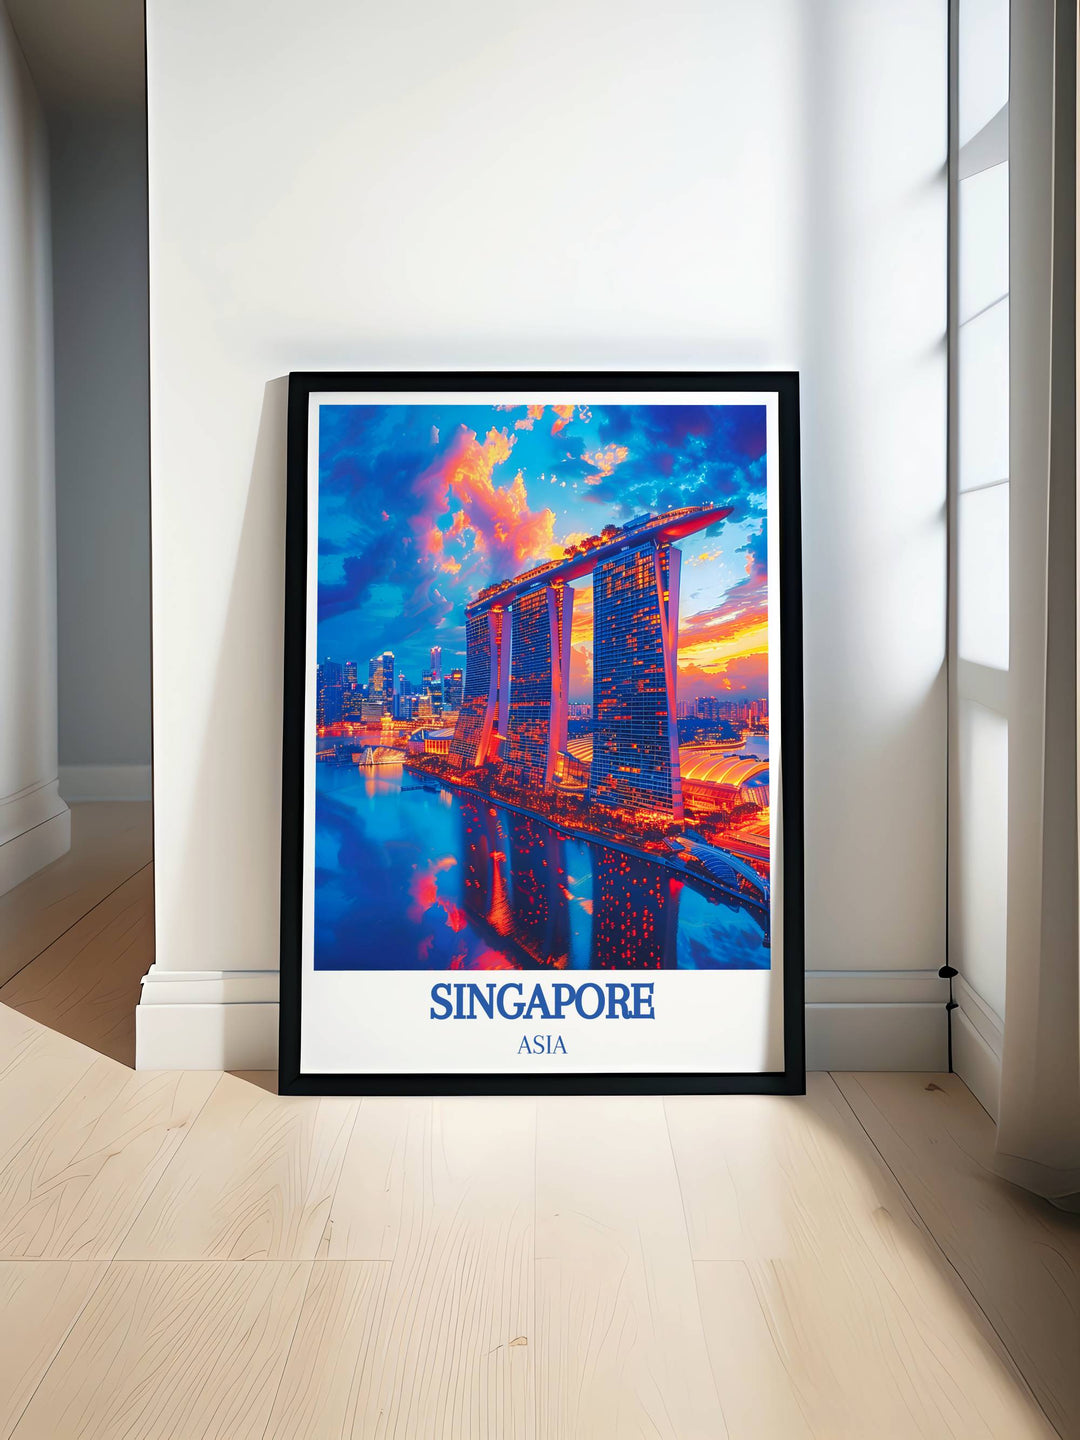 Detailed Marina Bay Sands art print capturing the iconic triple towers set against the Singapore skyline, perfect for adding a modern architectural flair to any sophisticated living space or office.